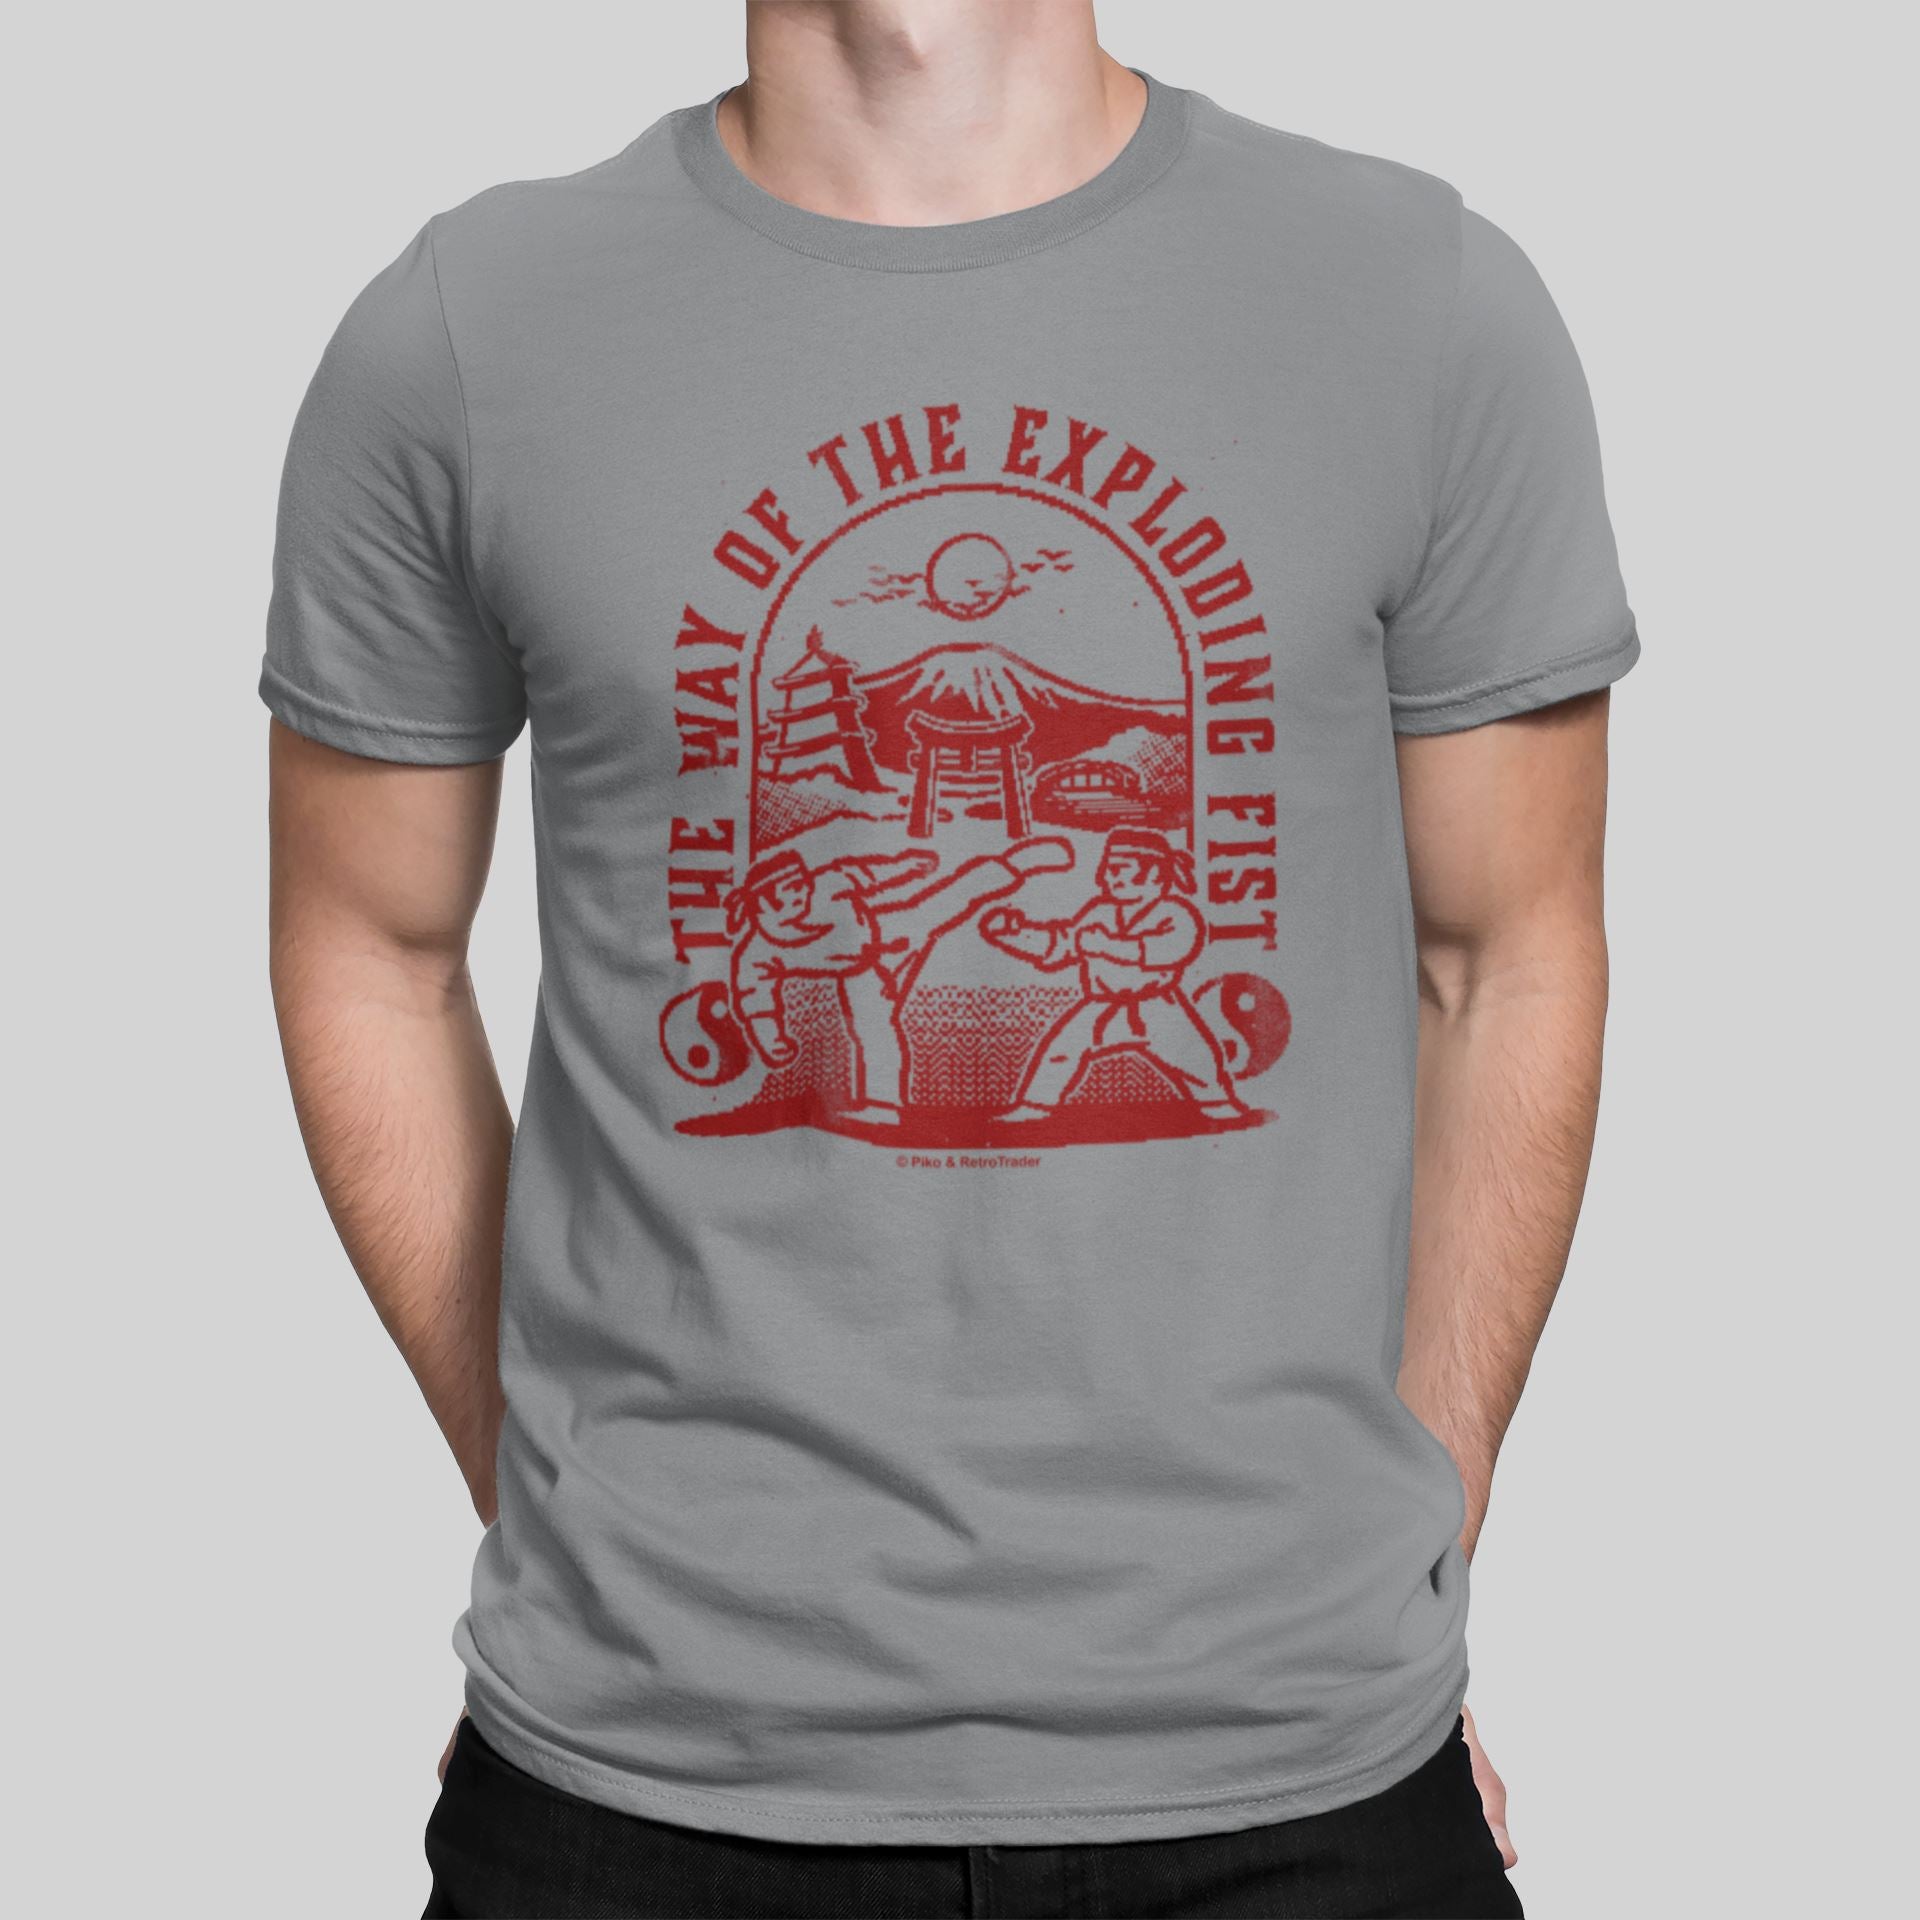 Way Of The Exploding Fist Sunbeam Retro Gaming T-Shirt T-Shirt Seven Squared Small 34-36" Grey 